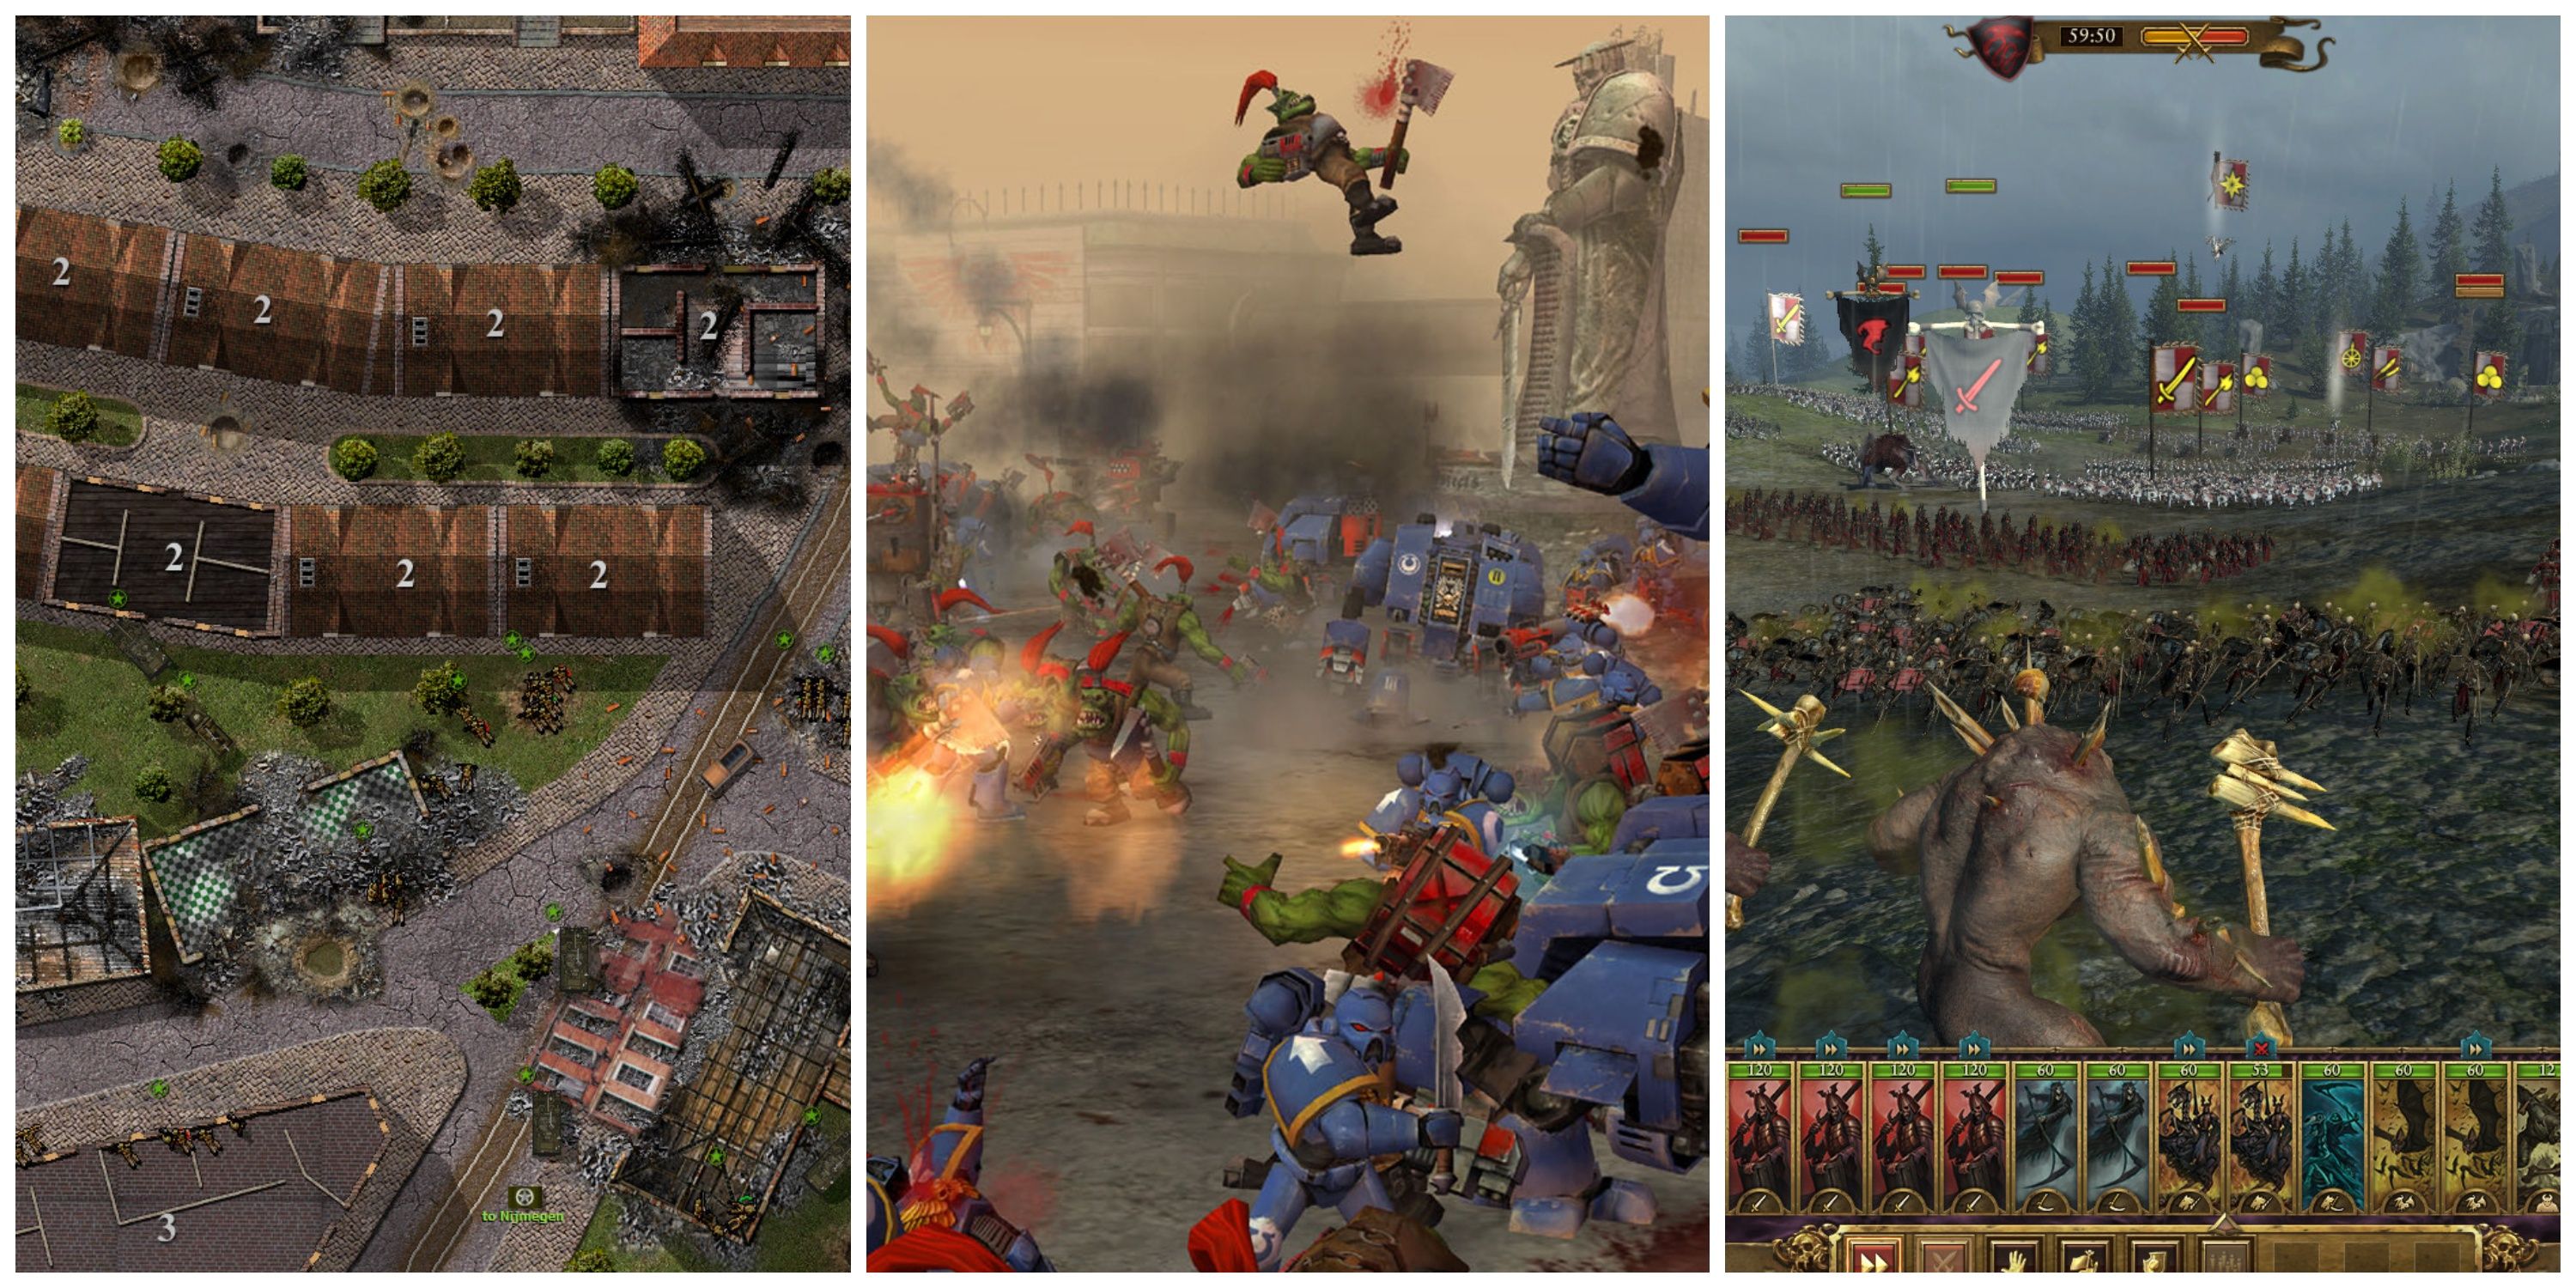 Strategy Games With The Best Morale Systems (Featured Image) - Close Combat: Last Stand Arnhem + Dawn Of War + Total War: Warhammer